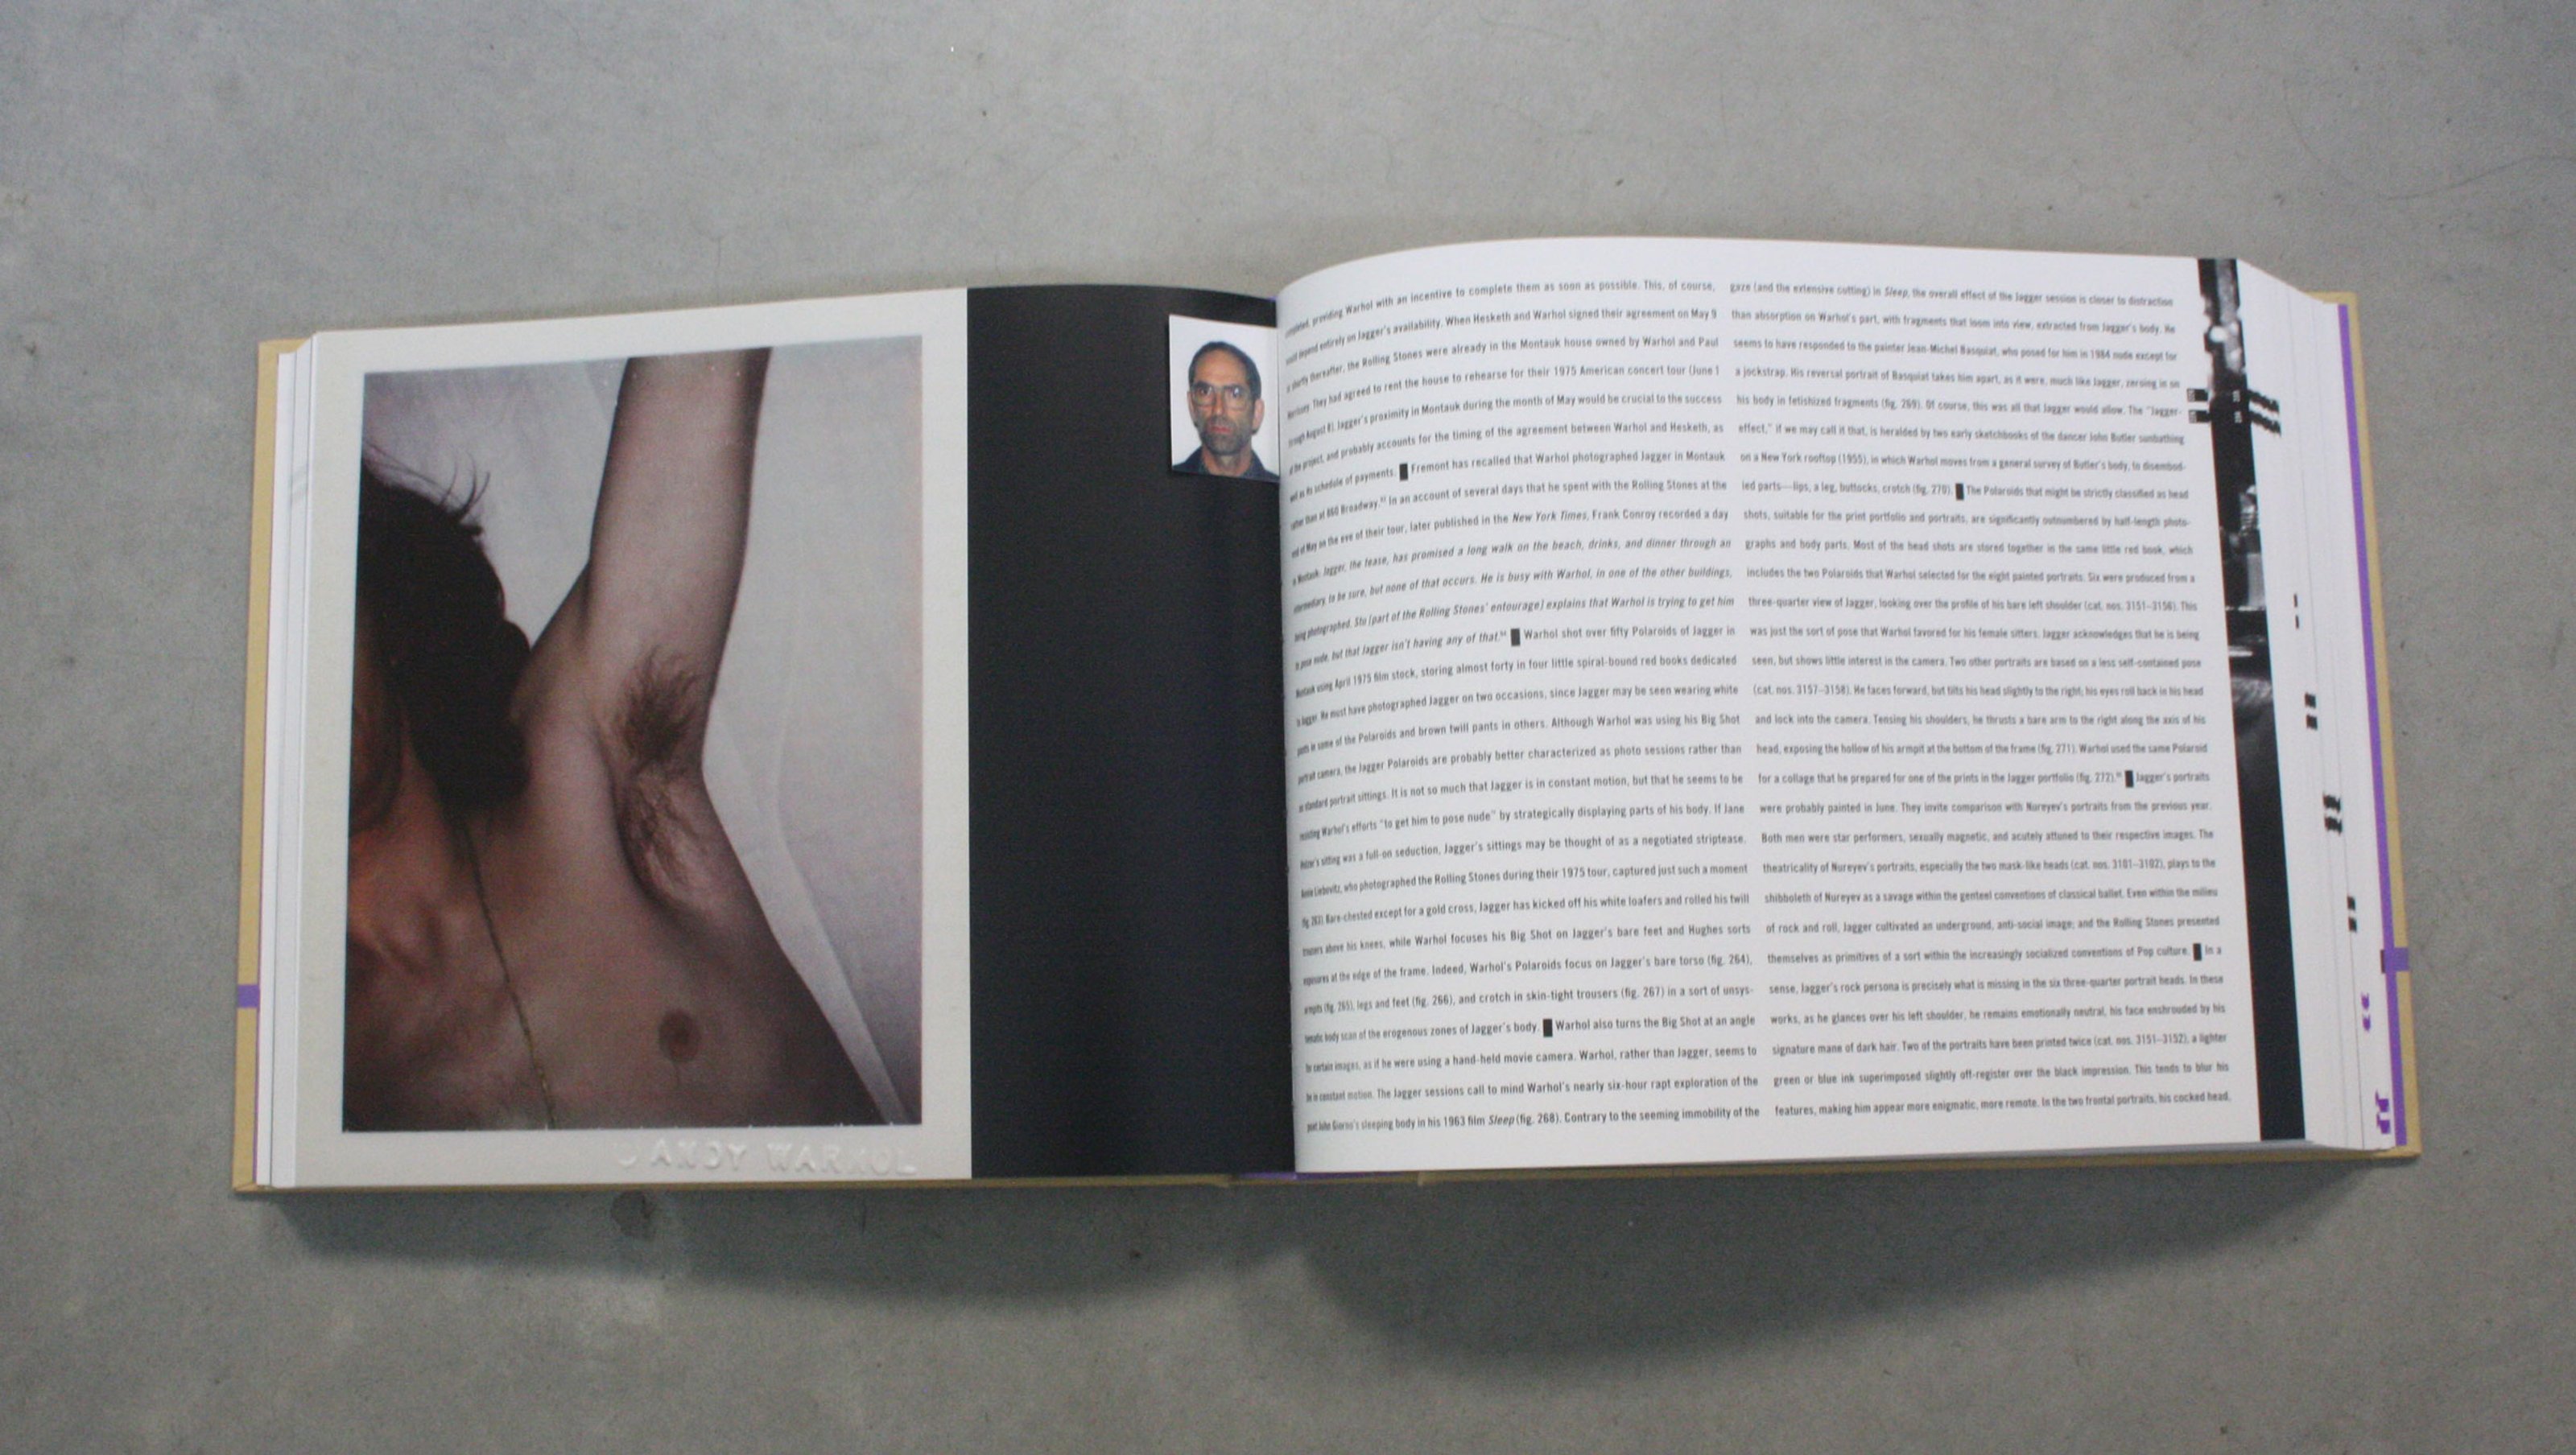 Jonathan Monk, Lost in My Head 2005-2015, Passport photo of artist in a book